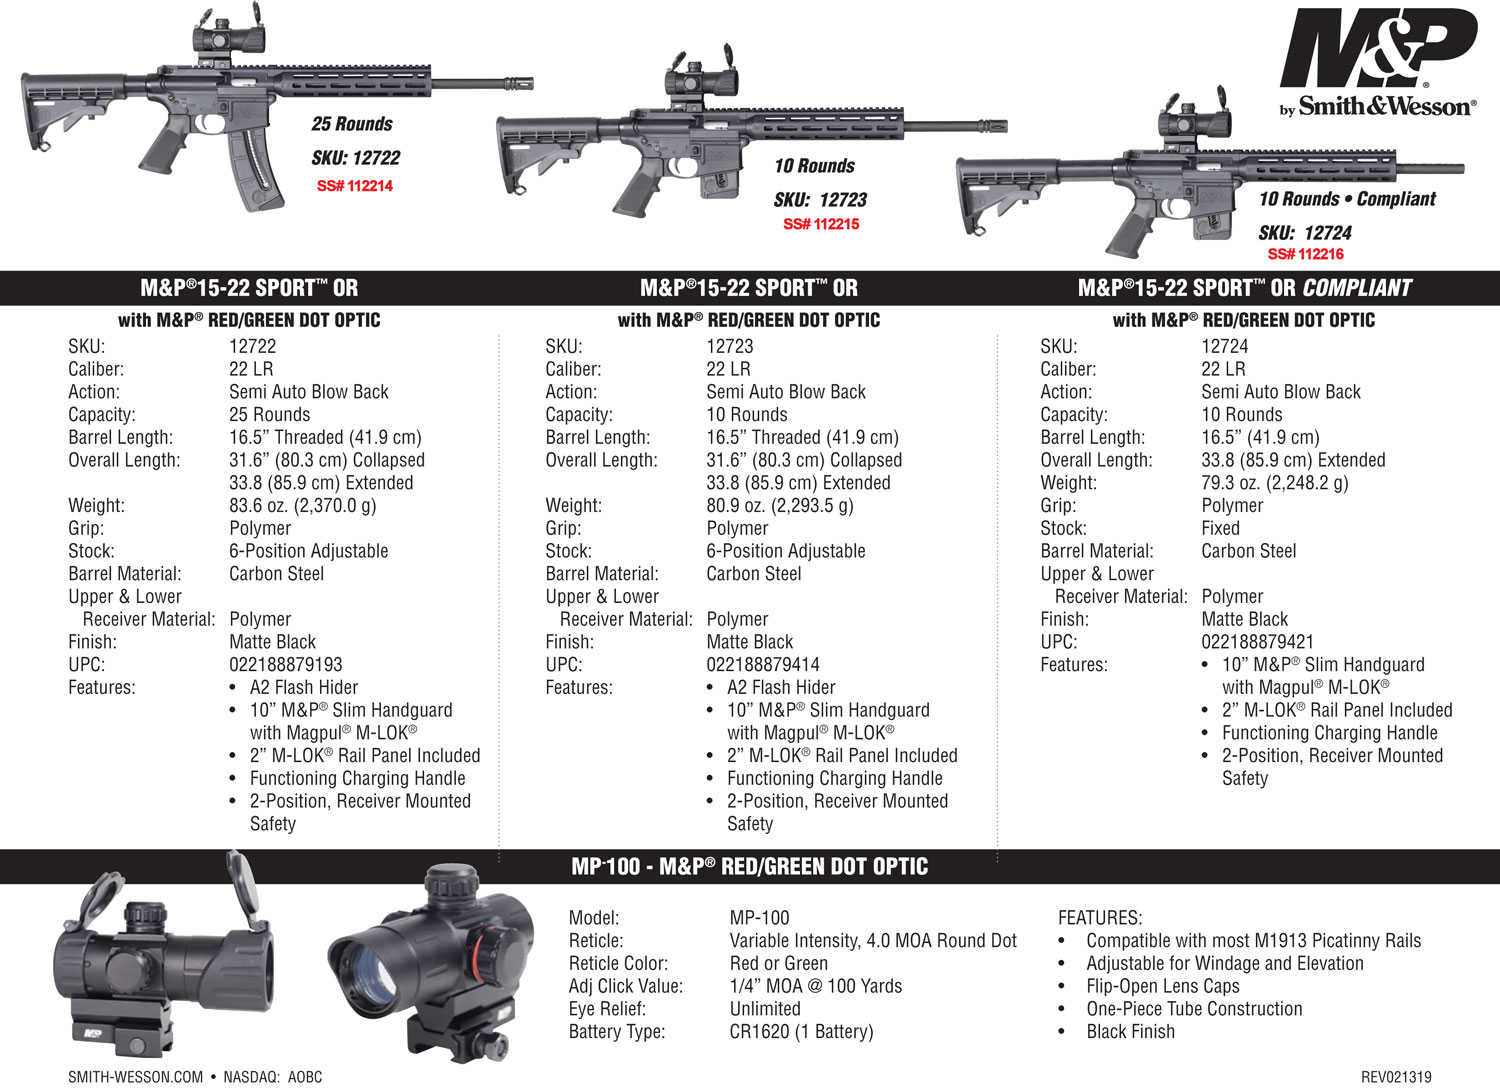 Smith & Wesson M&P15-22 Sport Rifle With Red Dot 22 Long 25+1 Round Capacity 16.5" Threaded Barrel A1 Style Compensator